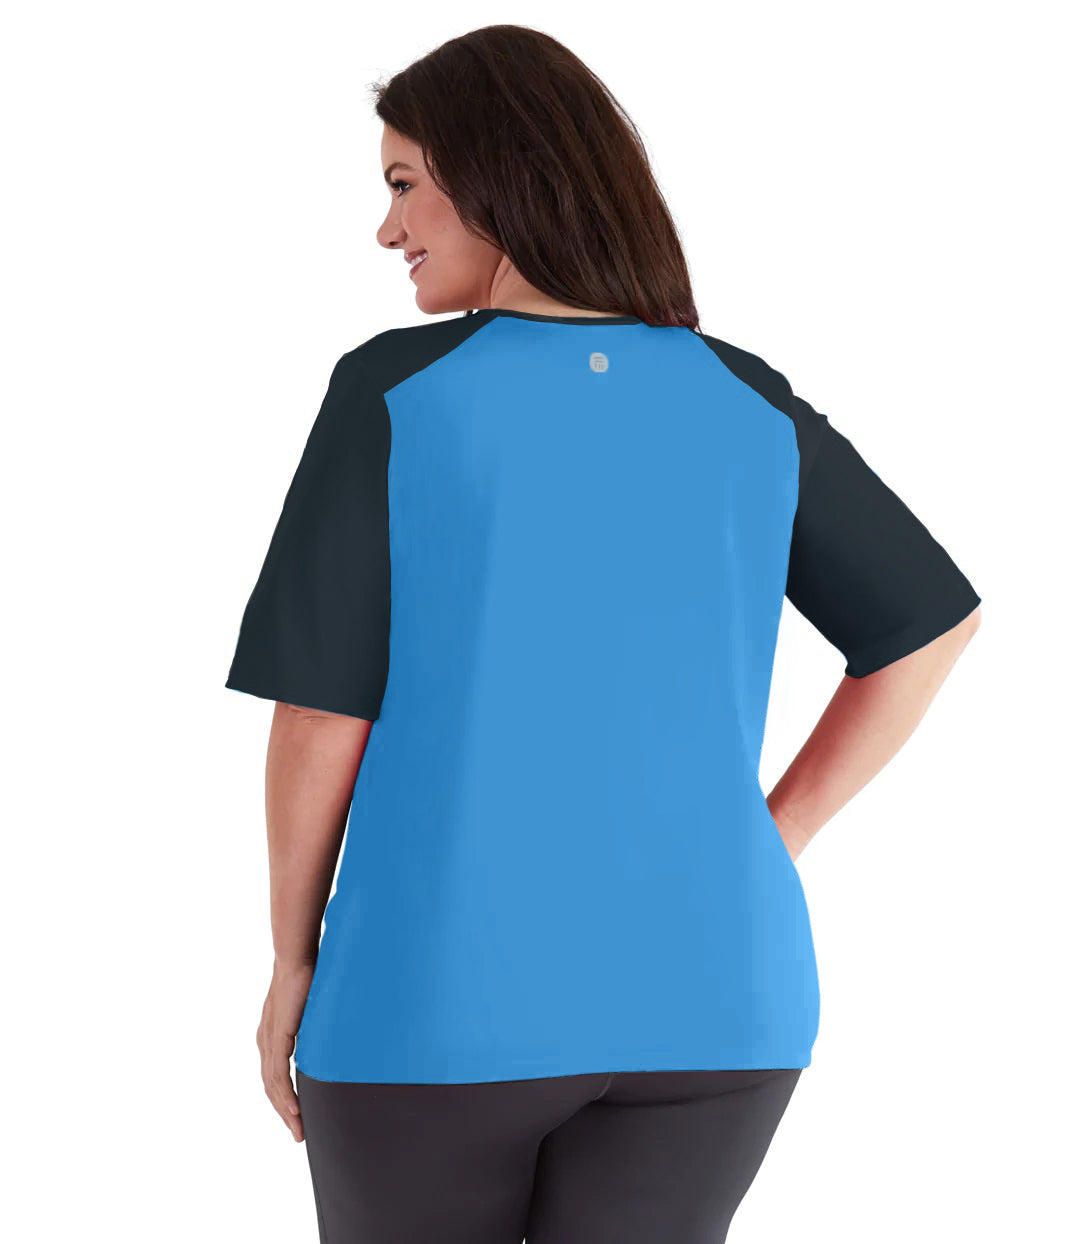 Plus size woman, facing back, wearing JunoActive's QuikEnergy Short Sleeve Swim and Sun Top. Sleeves are black and torso is turquoise. Sleeves come to model’s elbows. Her right hand is on her right hip.